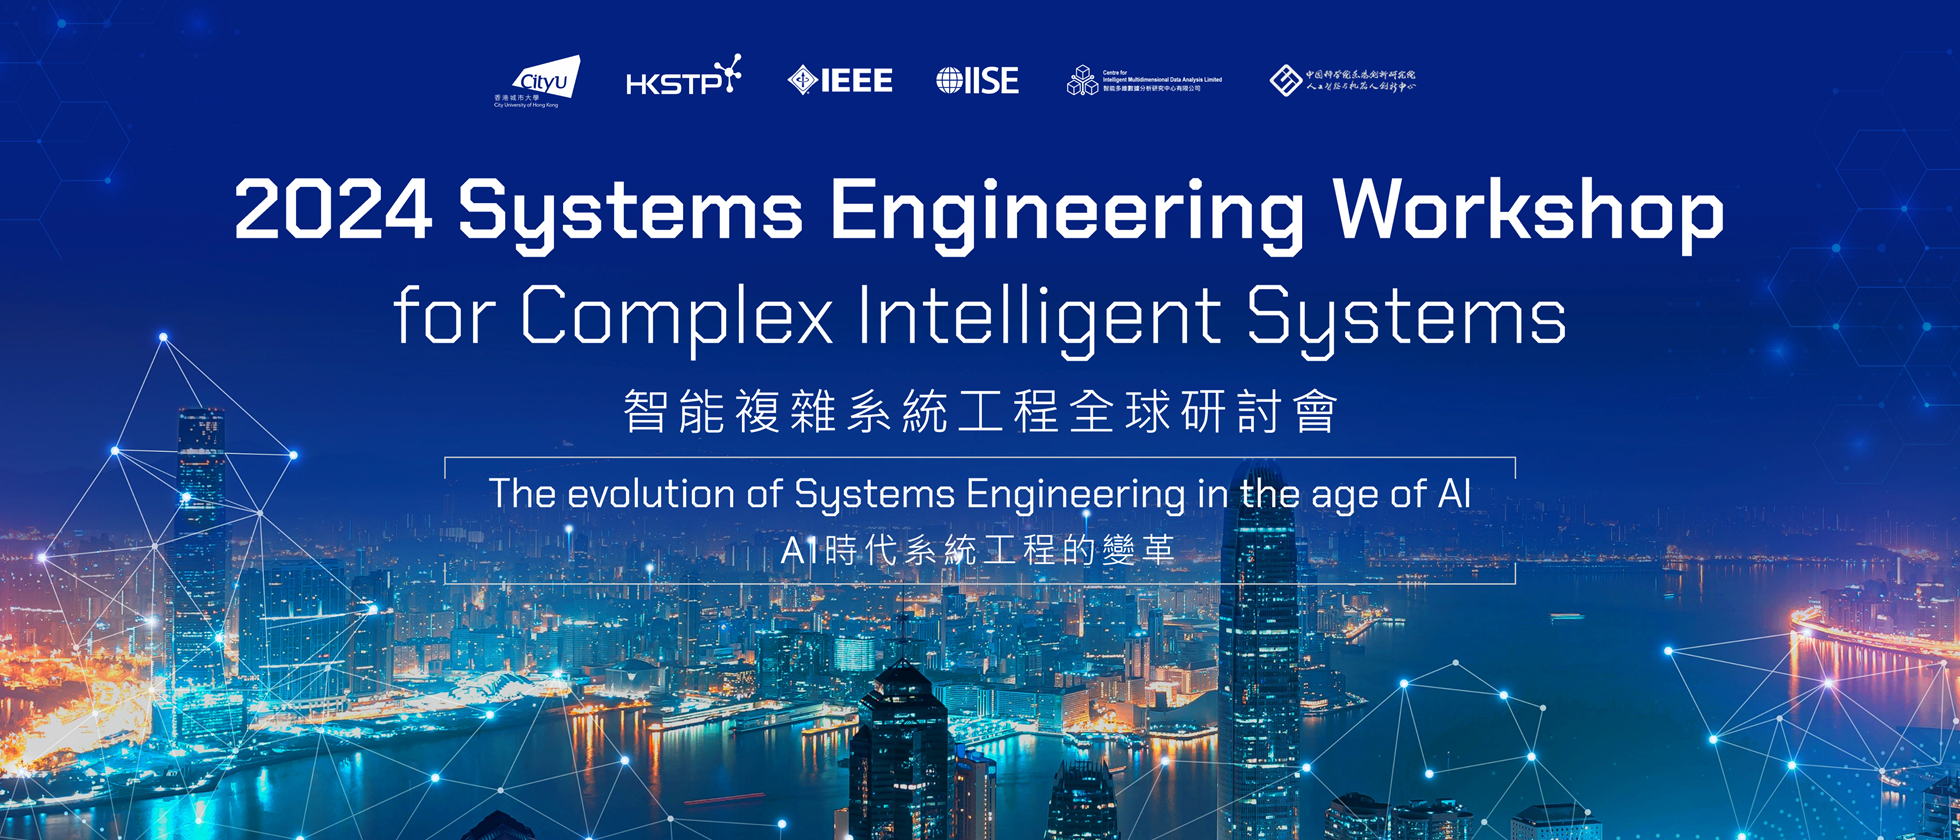 2024 Systems Engineering Workshop for Complex Intelligent Systems